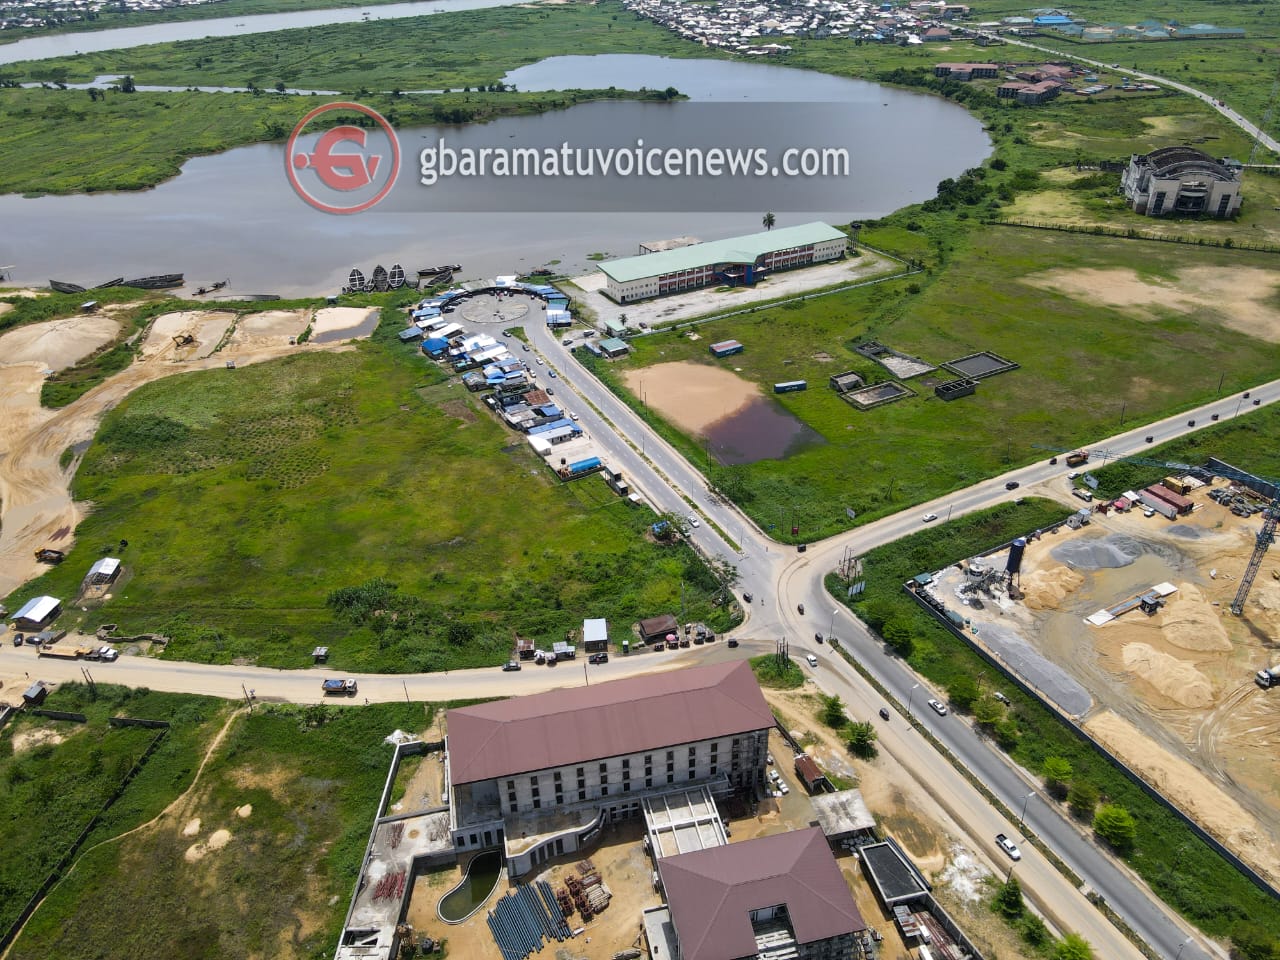 A view of the Niger Delta through the Lens – Bayelsa Ox-bow Lake in pictures